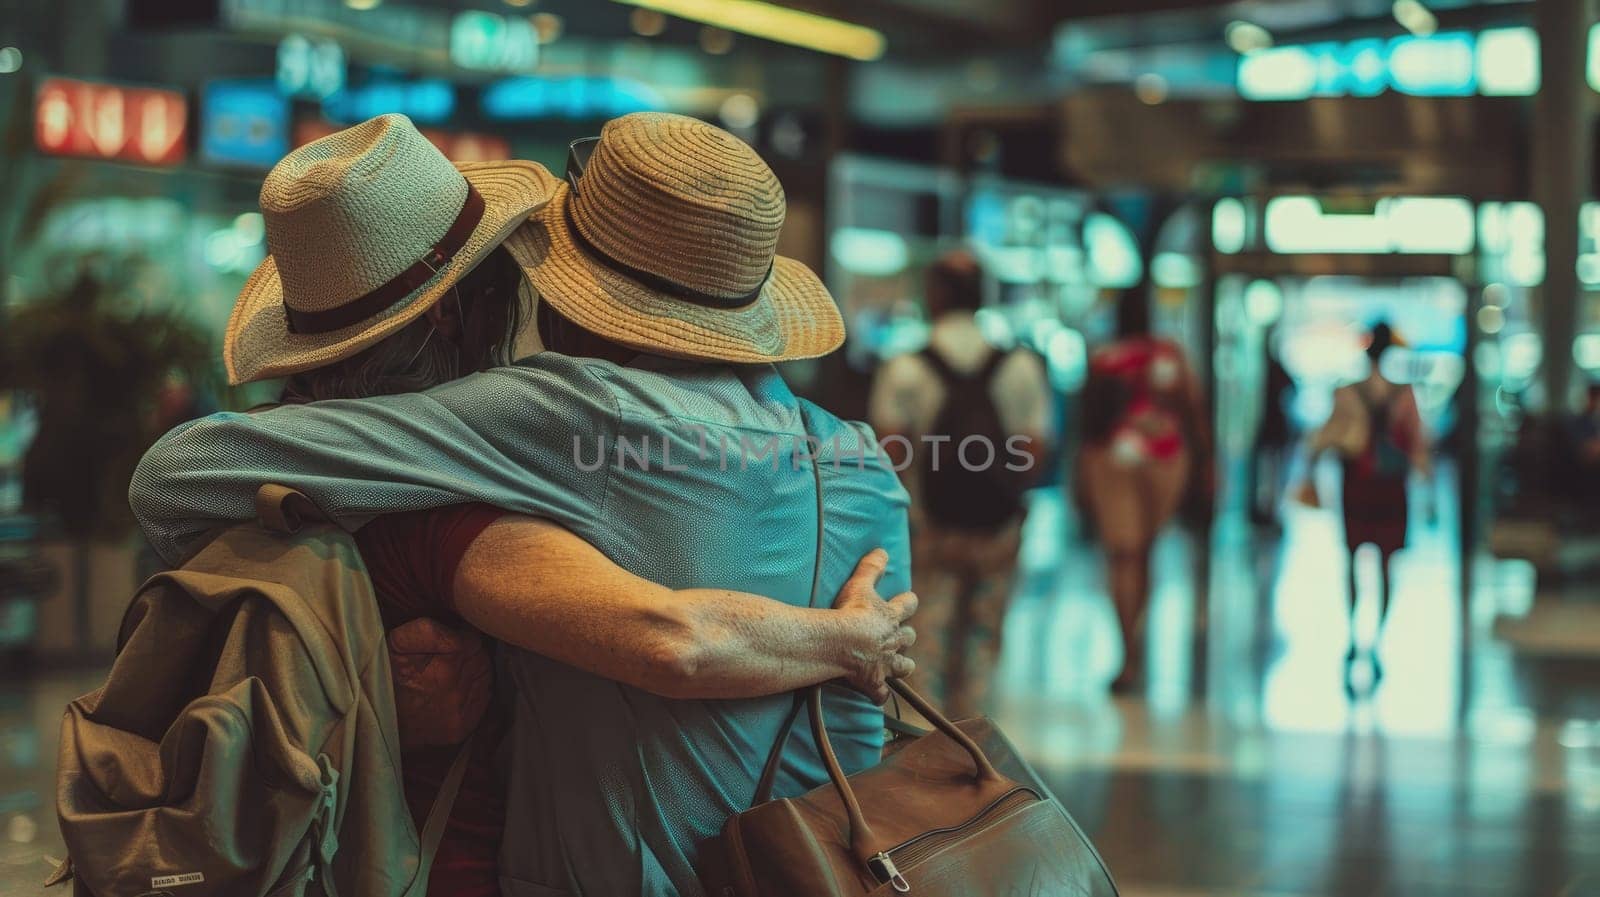 People at the airport hugging, Sharing a hug in airport, Until next time.